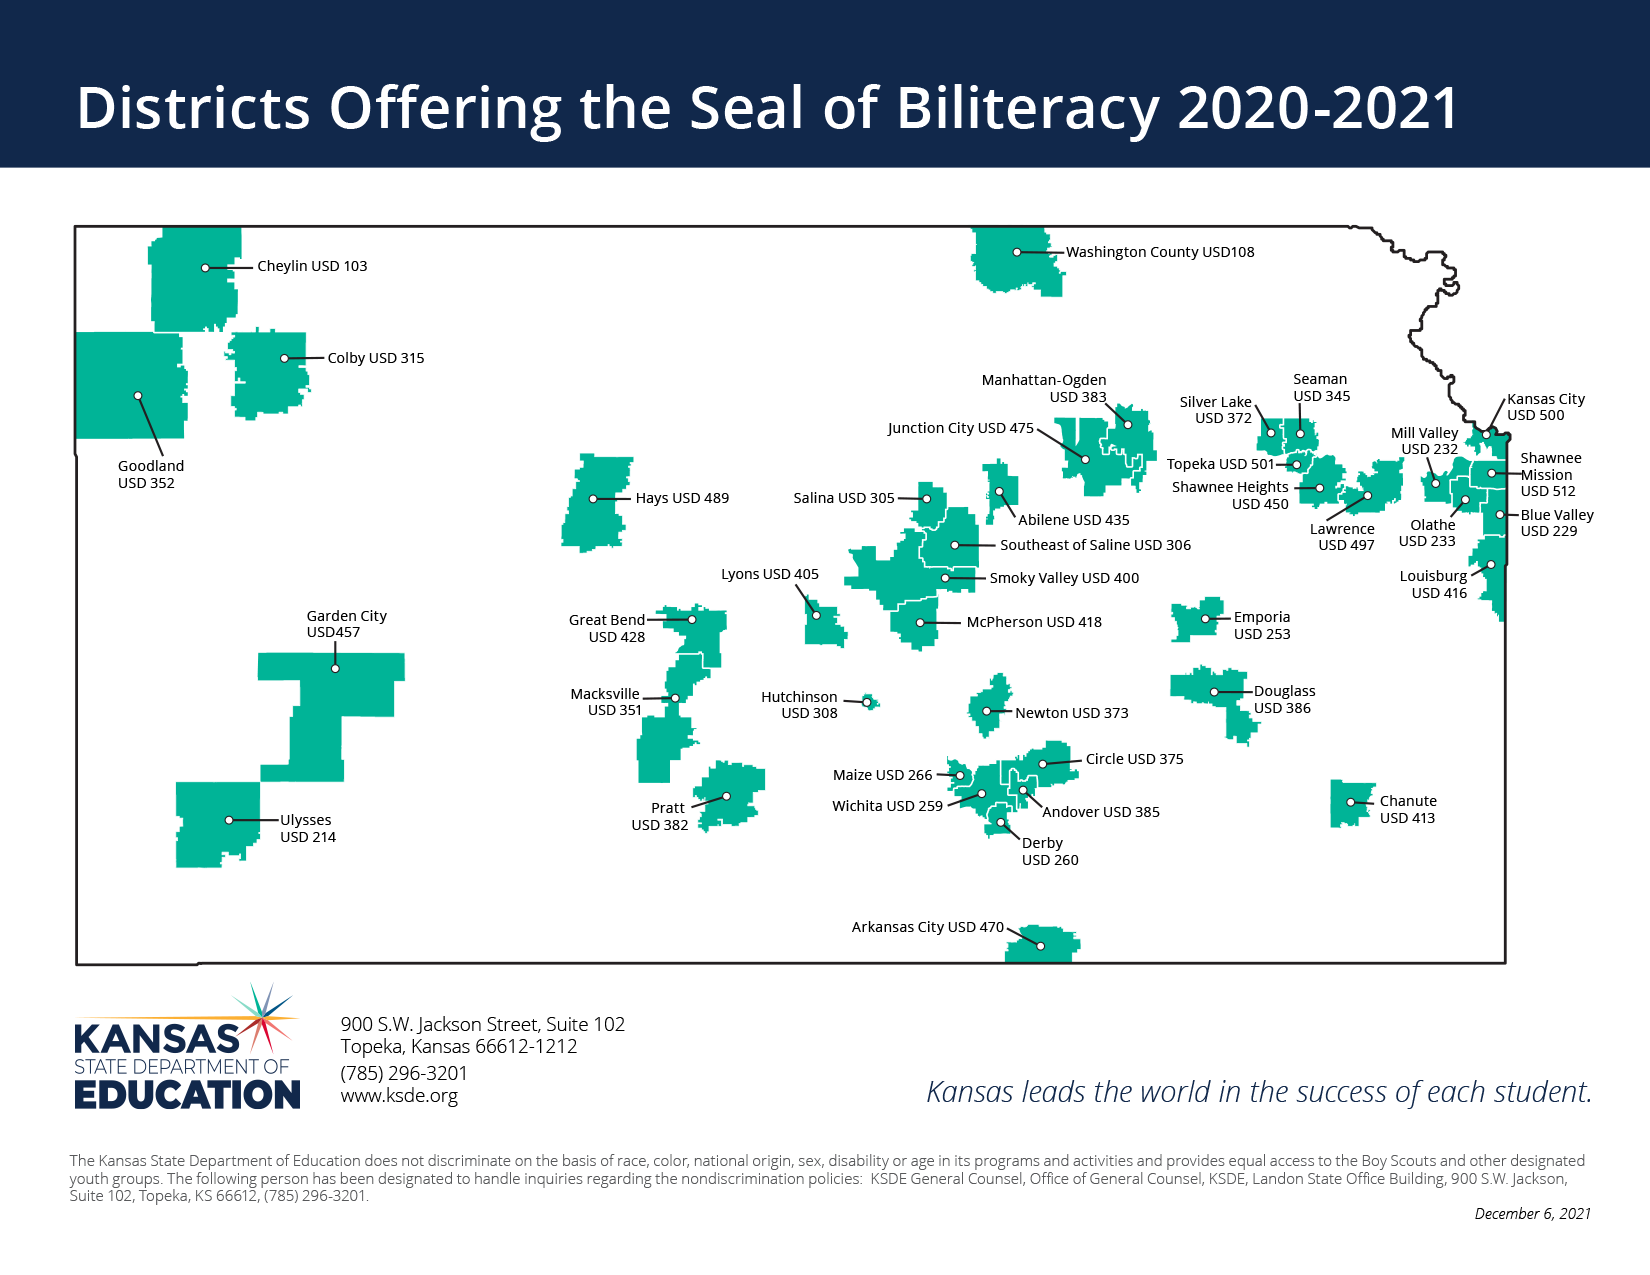 Map of the districts offering the Seal of Biliteracy 2020-2021